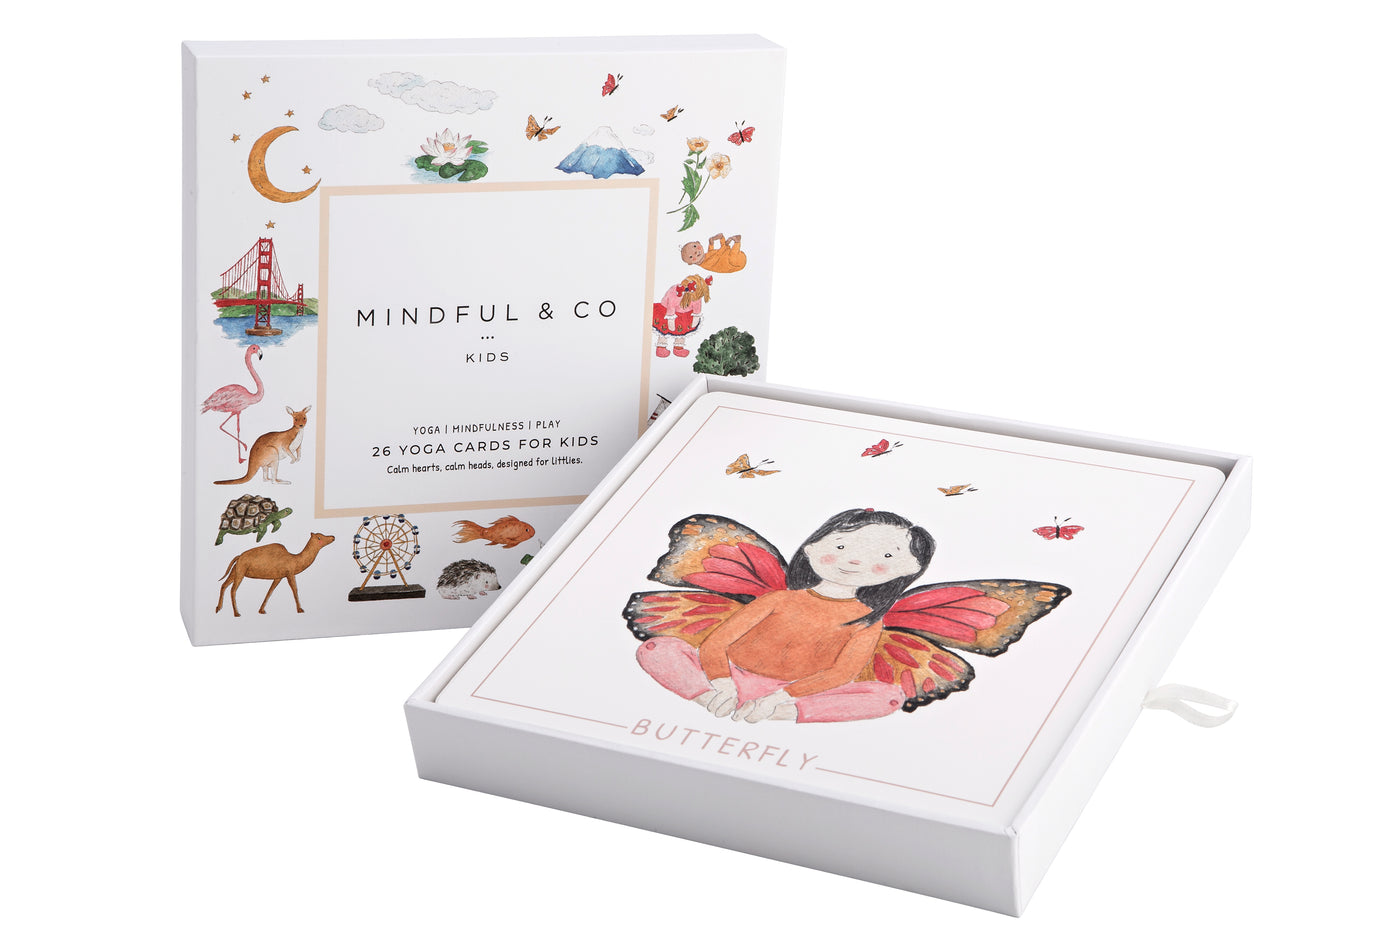 Mindful & Co Kids Yoga Flash Cards contents